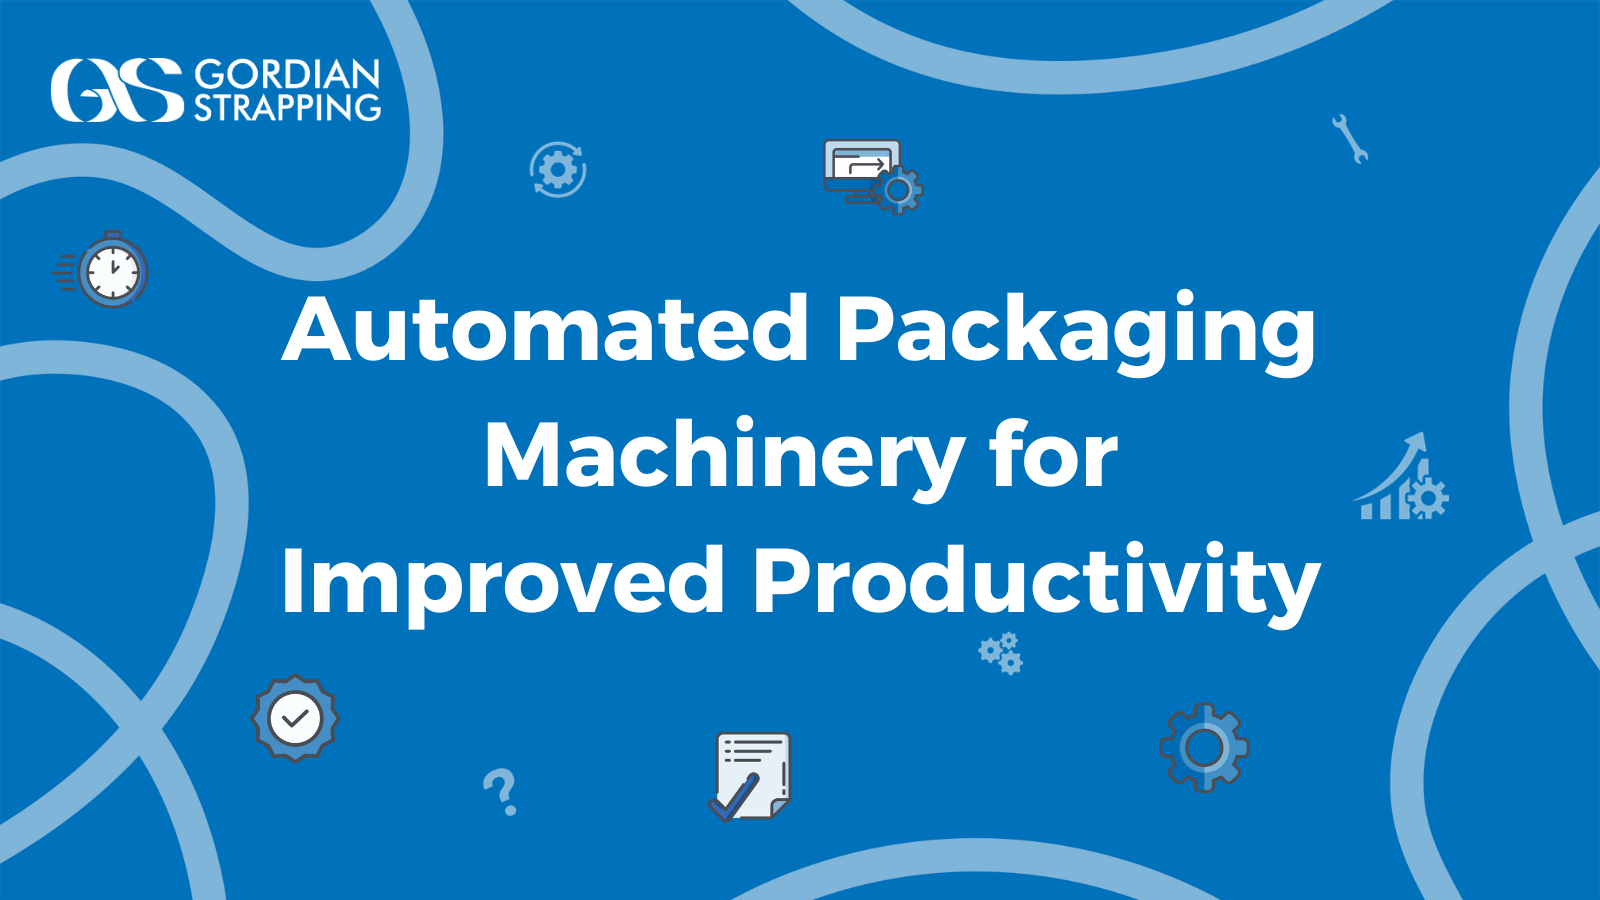 Automated Packaging Machinery for Improved Productivity